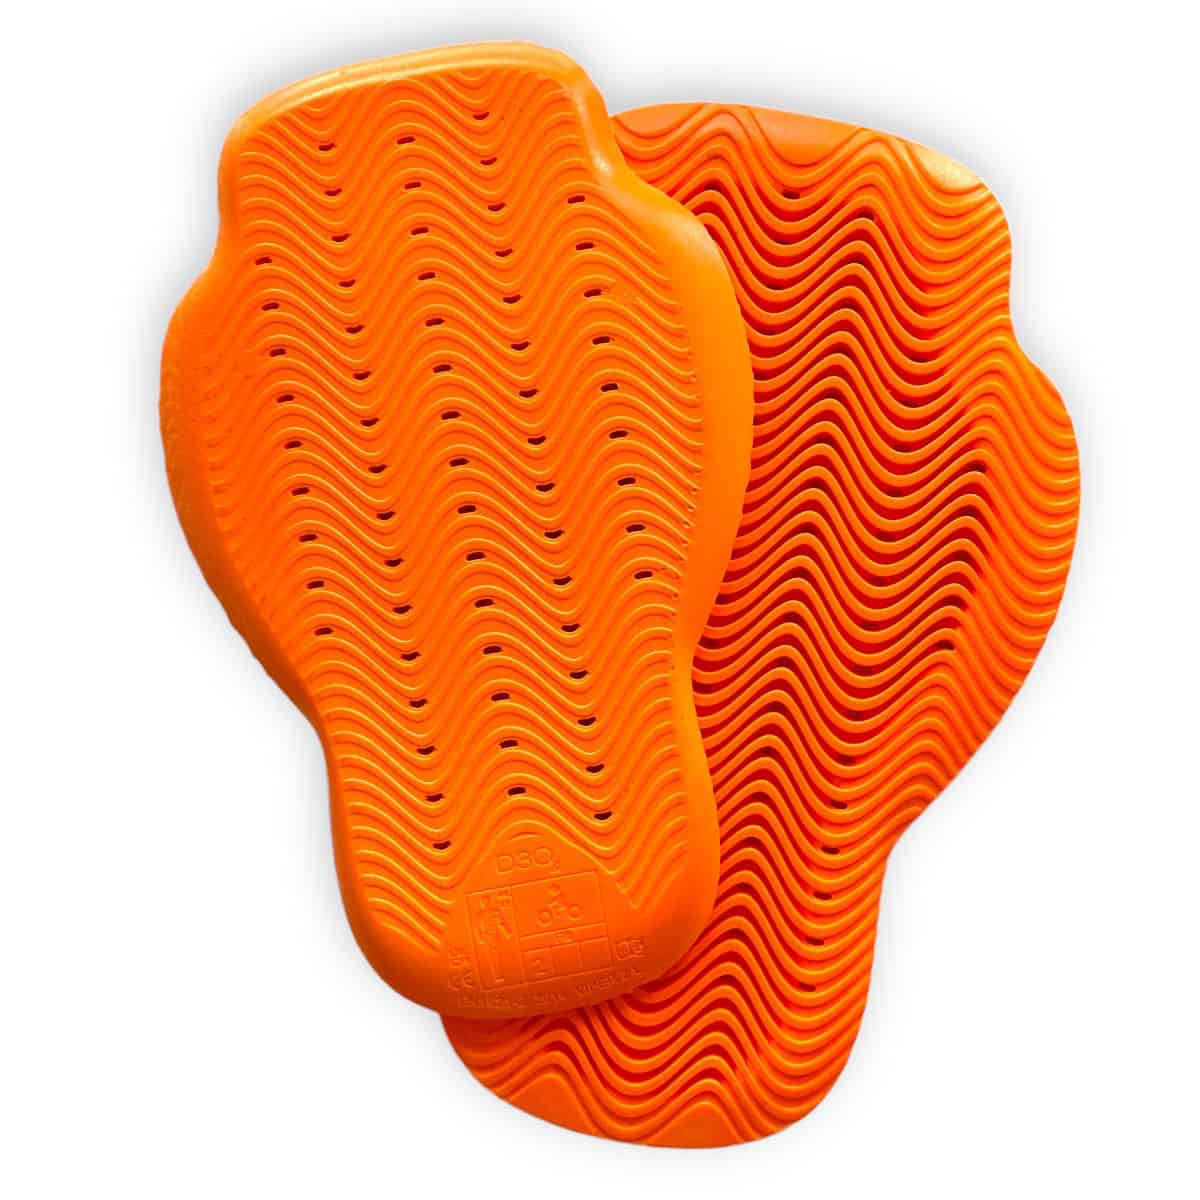 D3O Back Armour Insert: CE Level 2 back protector pad - air channels on the inside to provide wicking